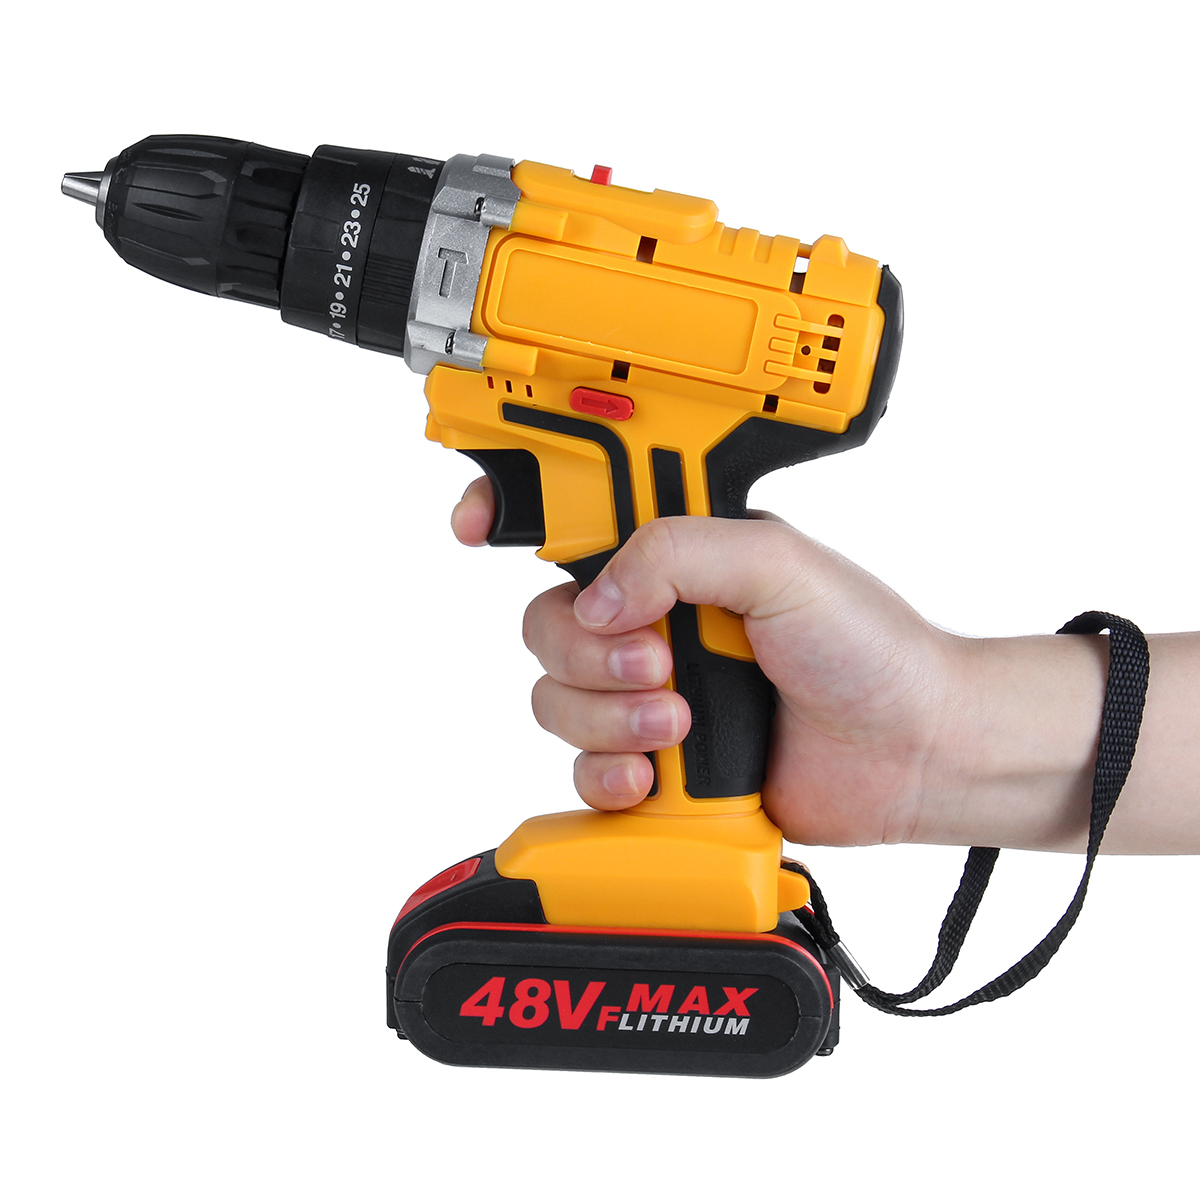 

48V 25+3 Gear Electric Impact Drill Li-Ion Rechargeable Power Hand Drill With LED Working Light Forward/Reverse Switch F